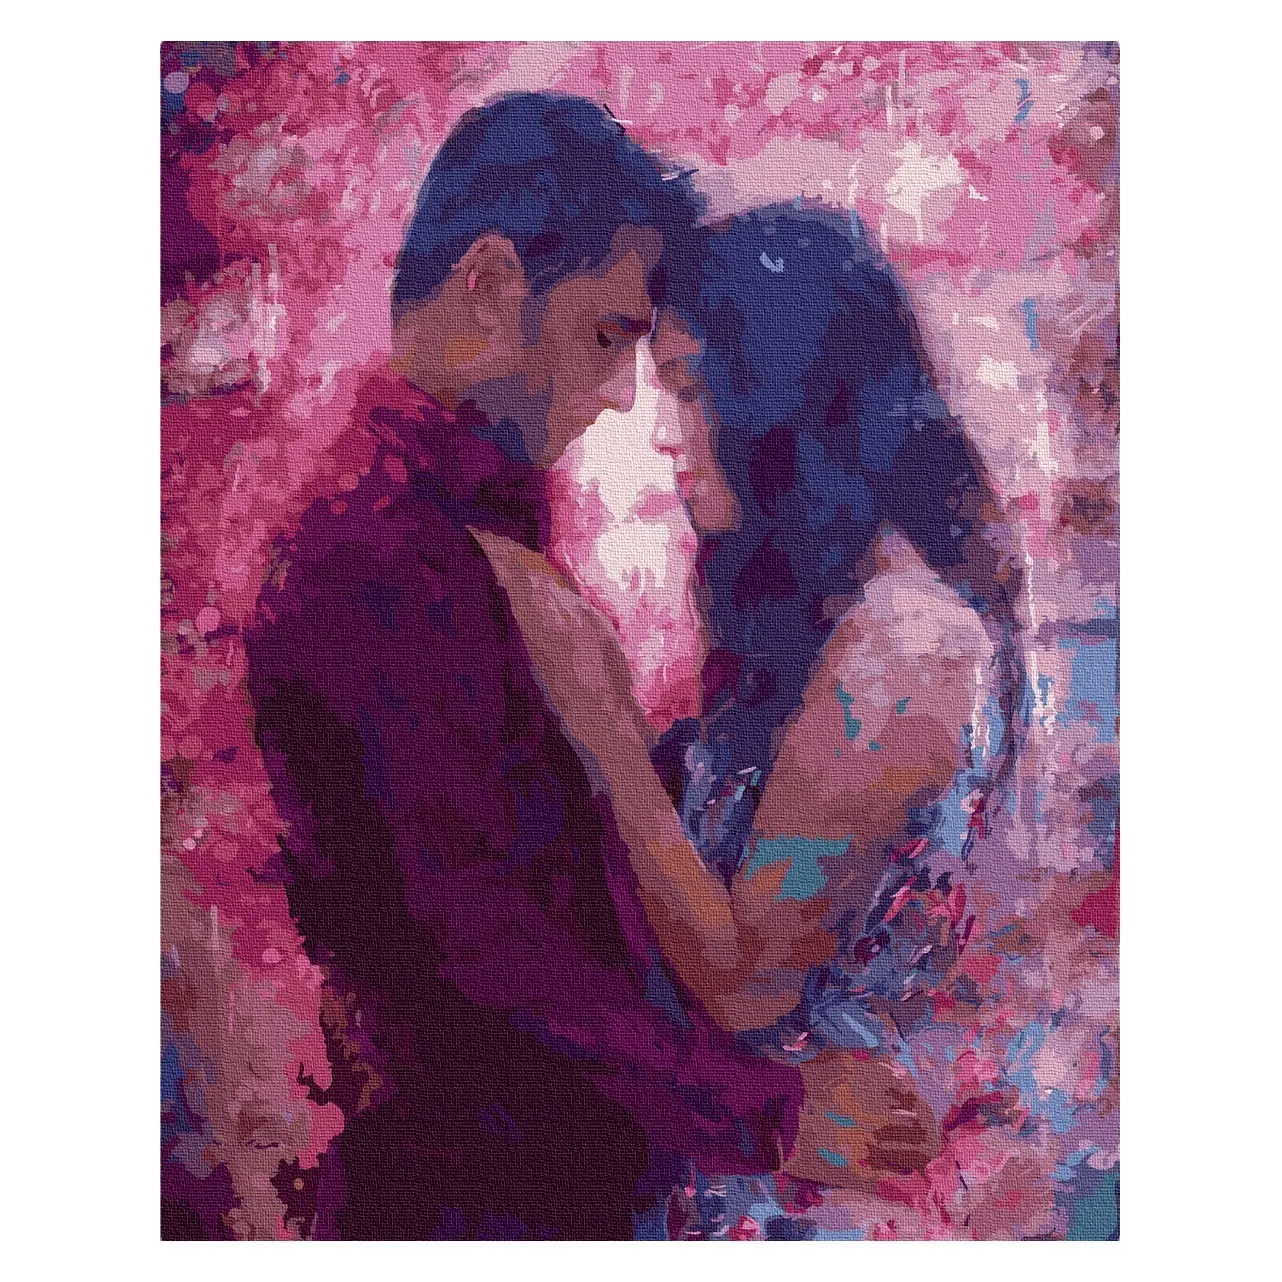 Couple Decoration Digital Painting By Number 40*50 Hot Design Lover Portrait Handmade Painting DIY Oil Painting With Frame